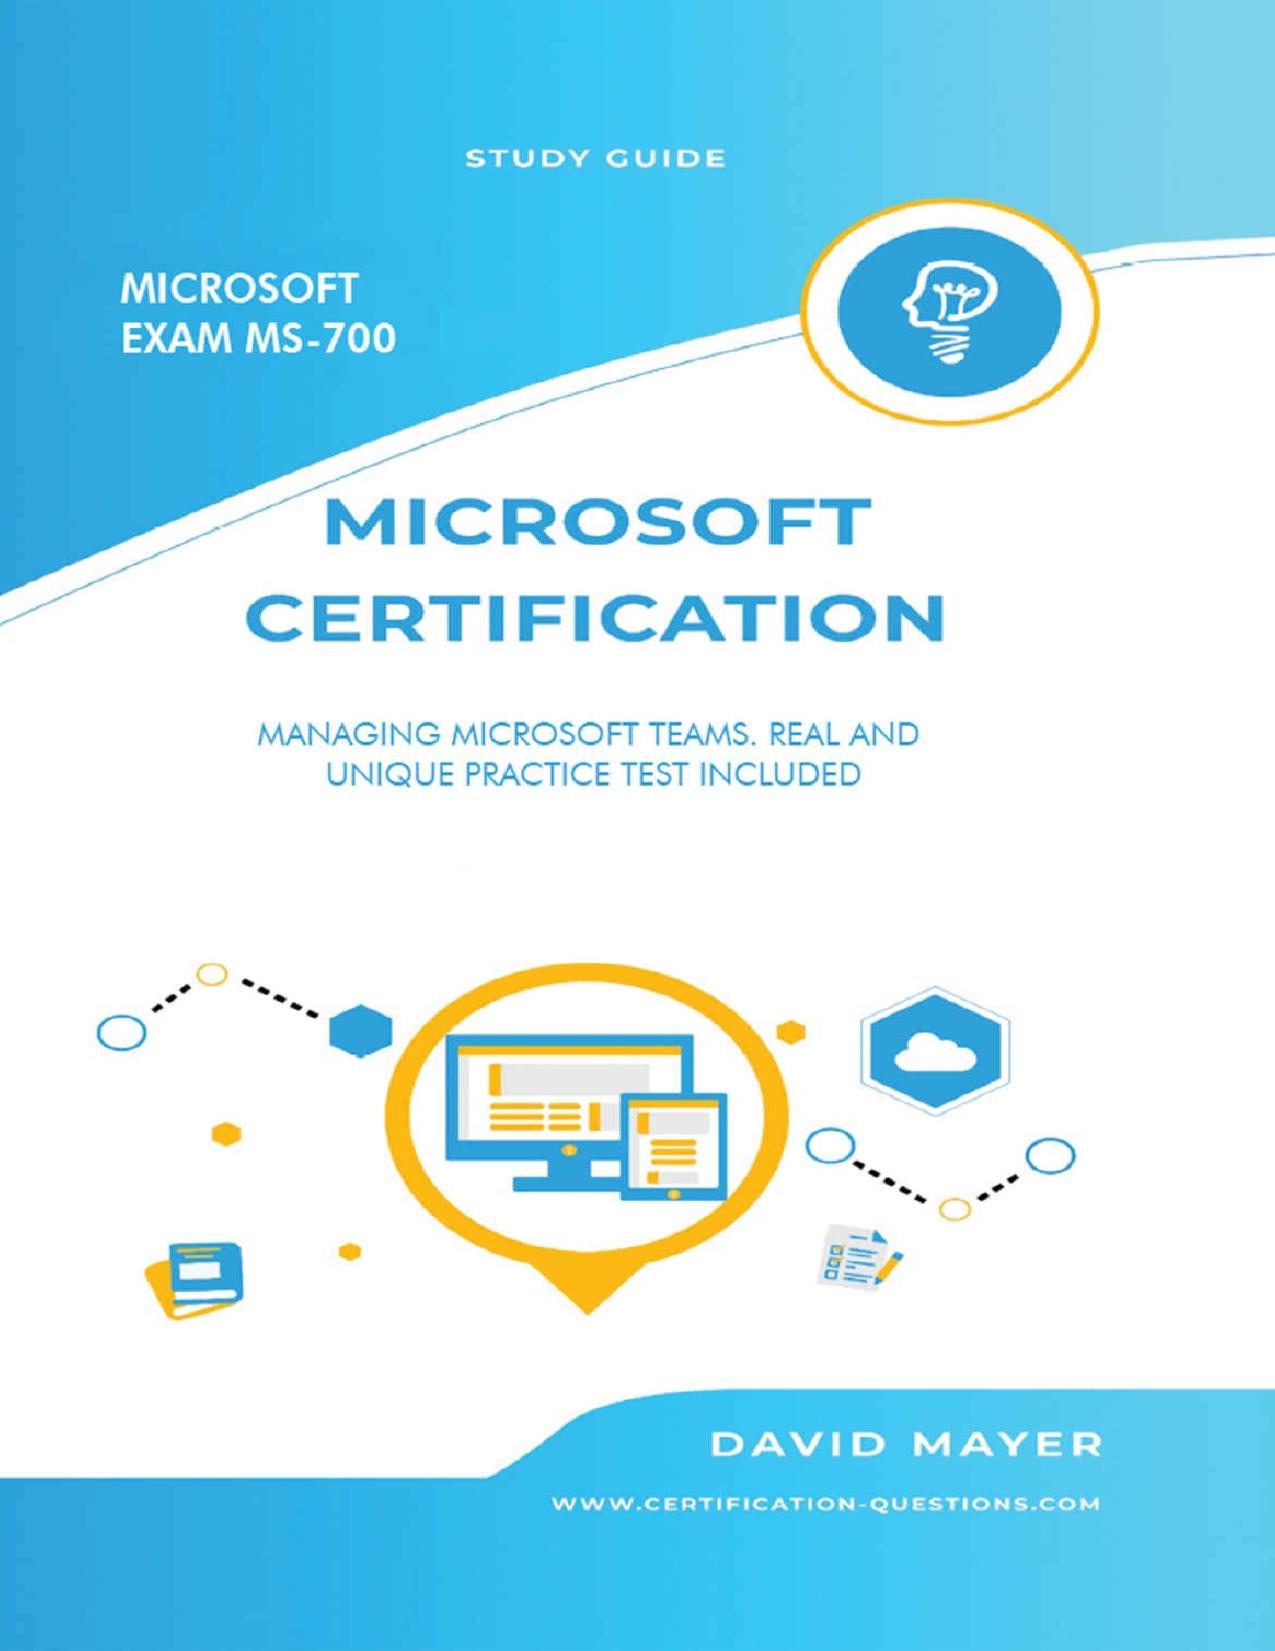 Microsoft Exam MS-700 : MANAGING MICROSOFT TEAMS. REAL AND UNIQUE PRACTICE TESTS INCLUDED by David Mayer